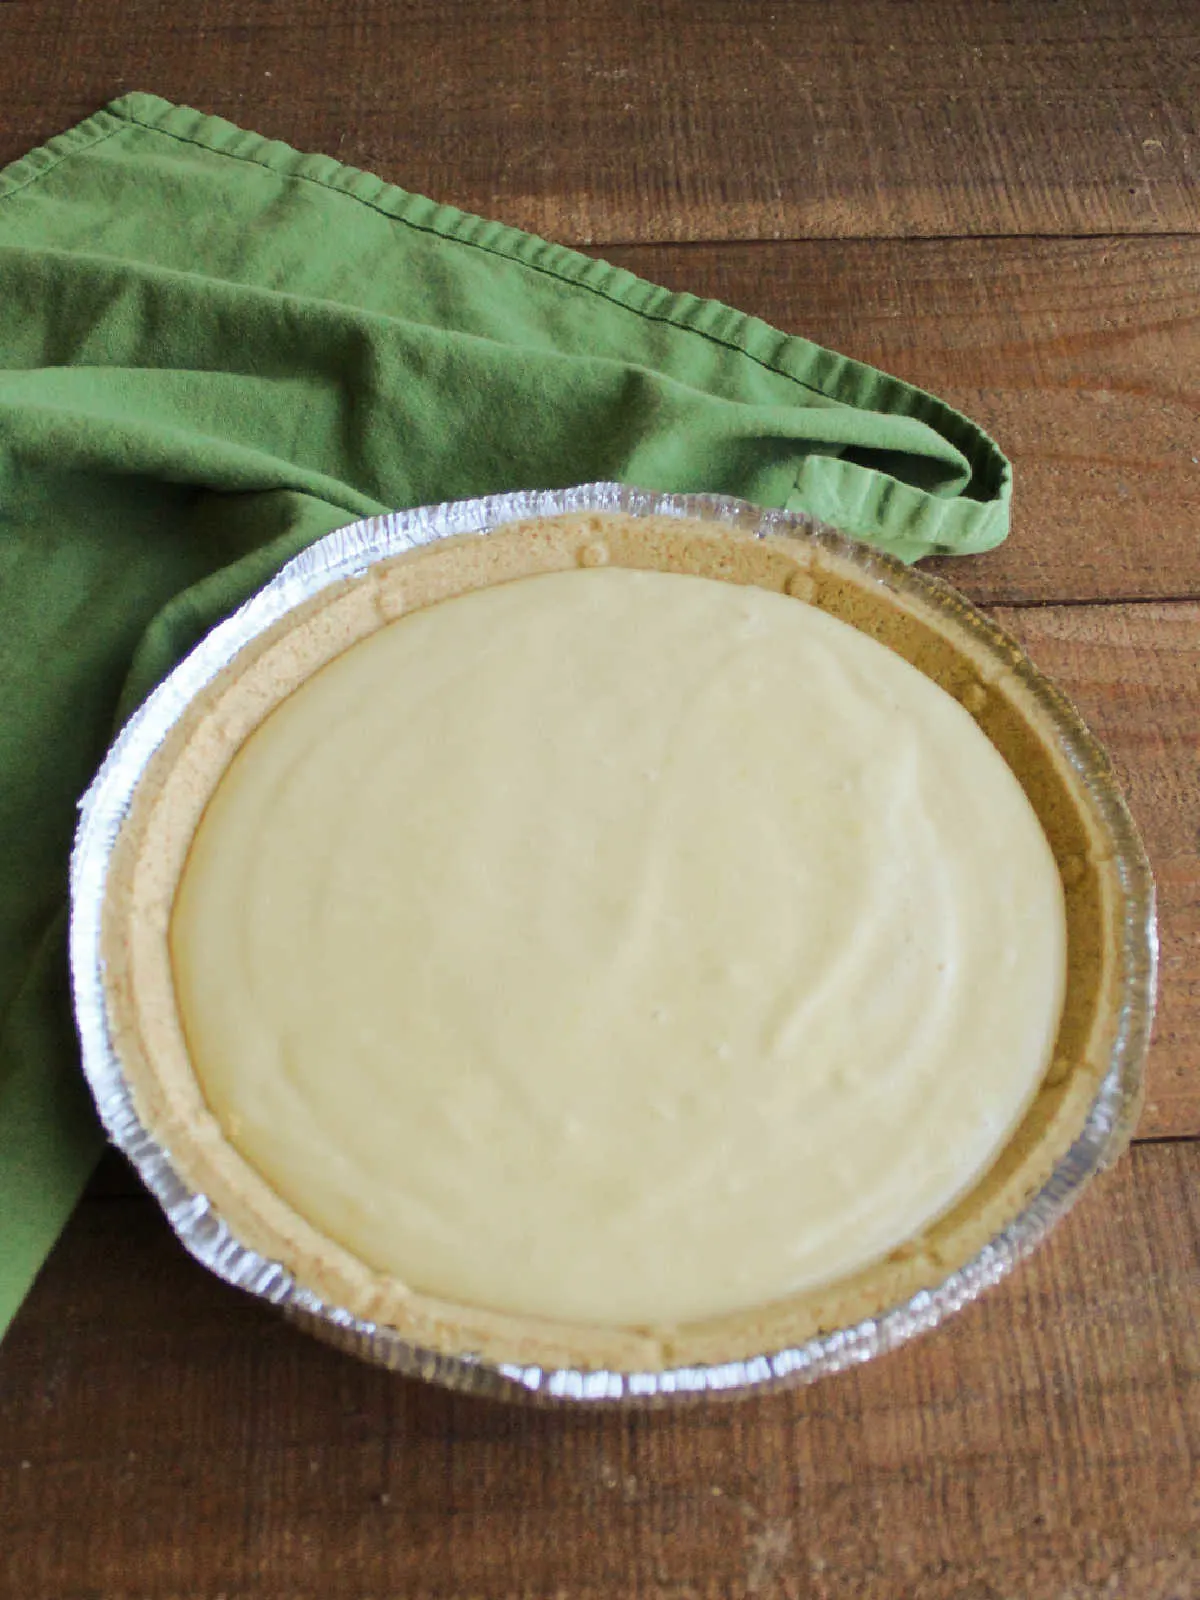 Key lime pie ready to go in the oven.